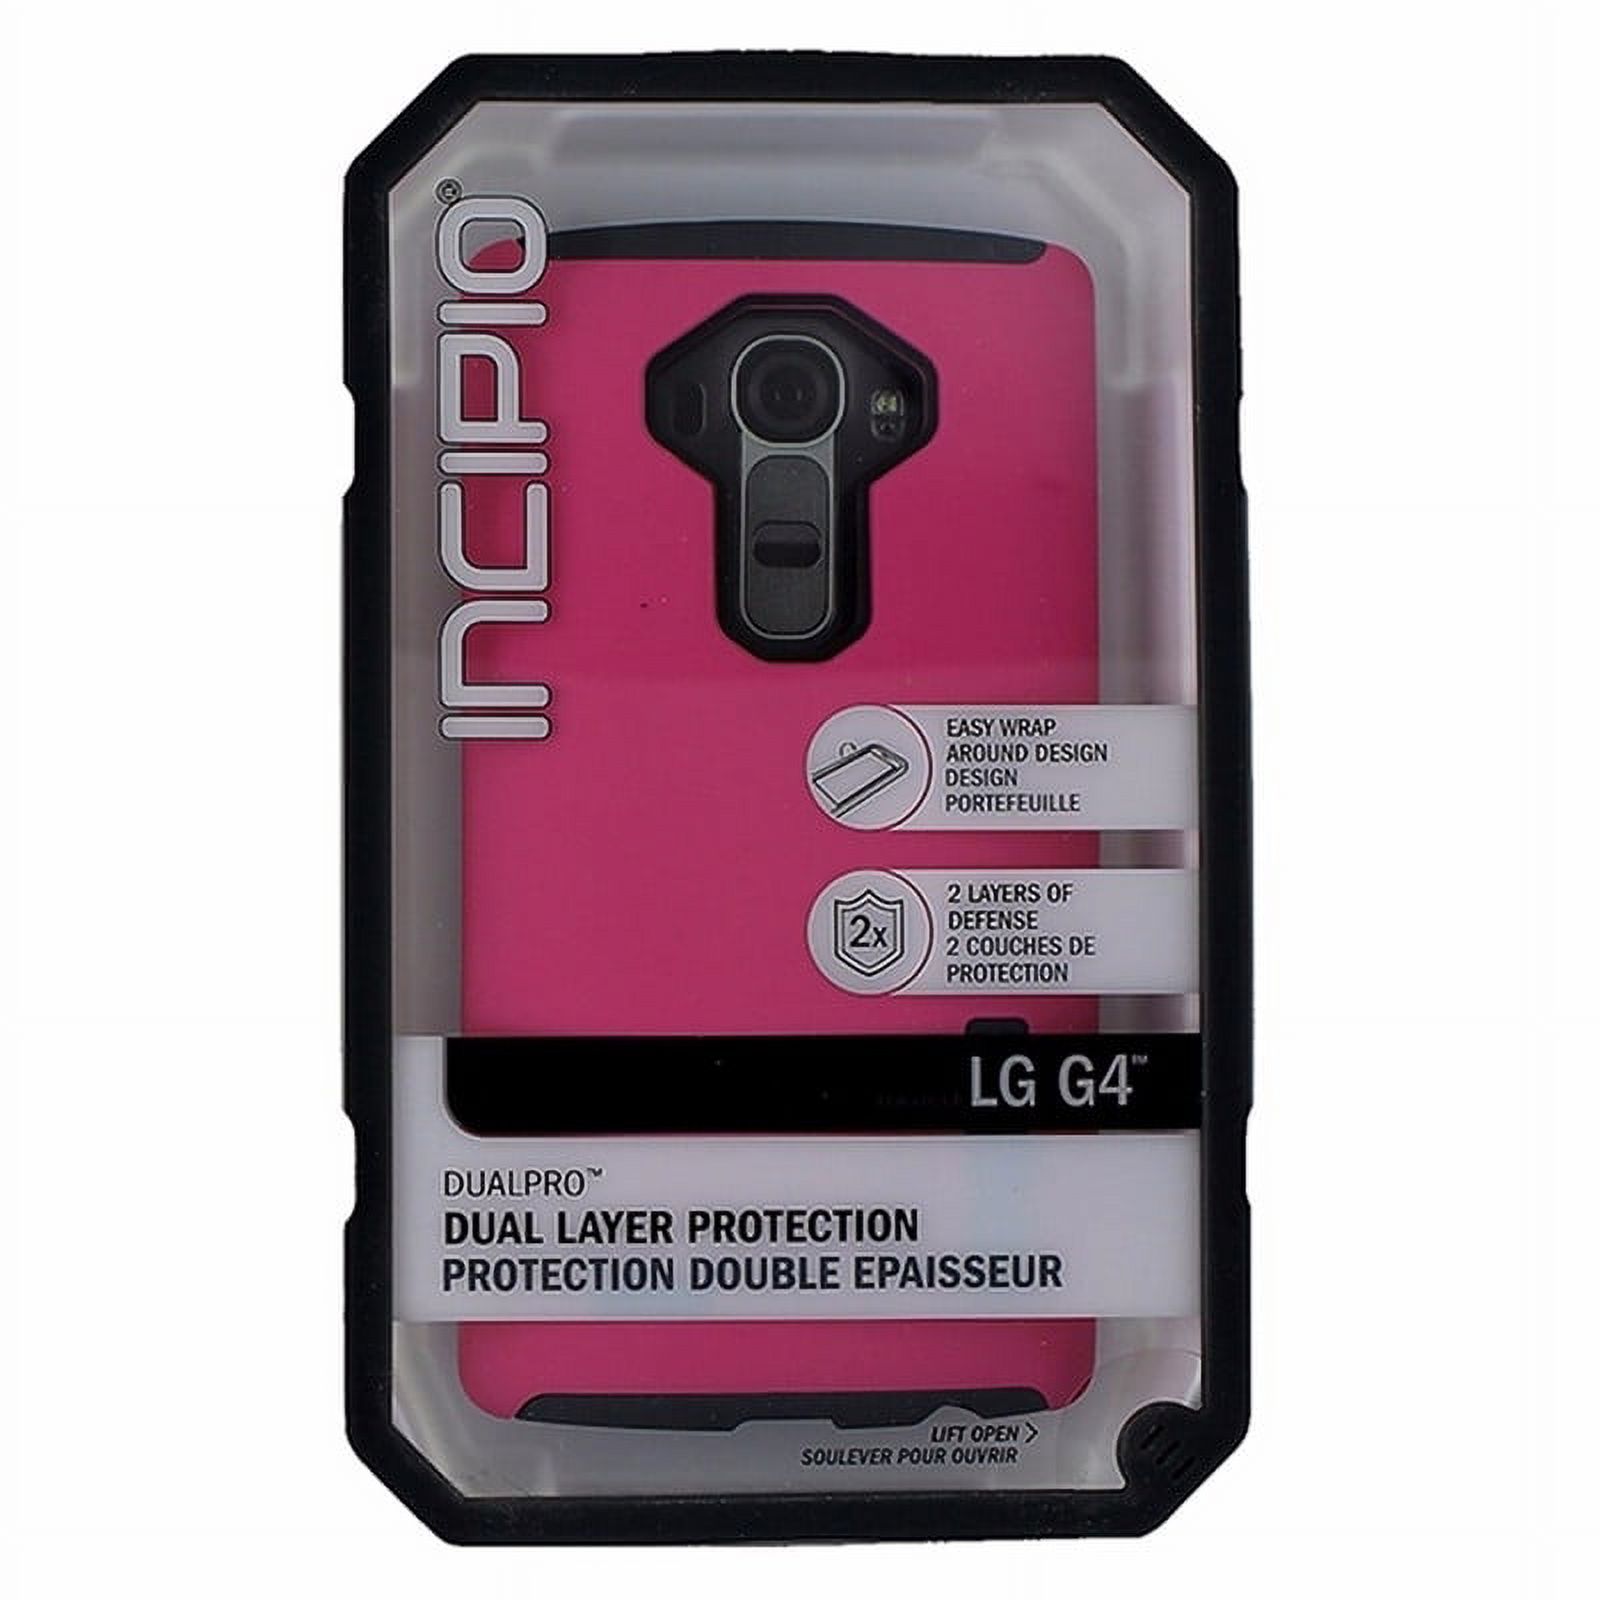 Incipio DualPro Series Case for LG G4 Smartphones - Matte Pink/Charcoal Gray - image 2 of 2